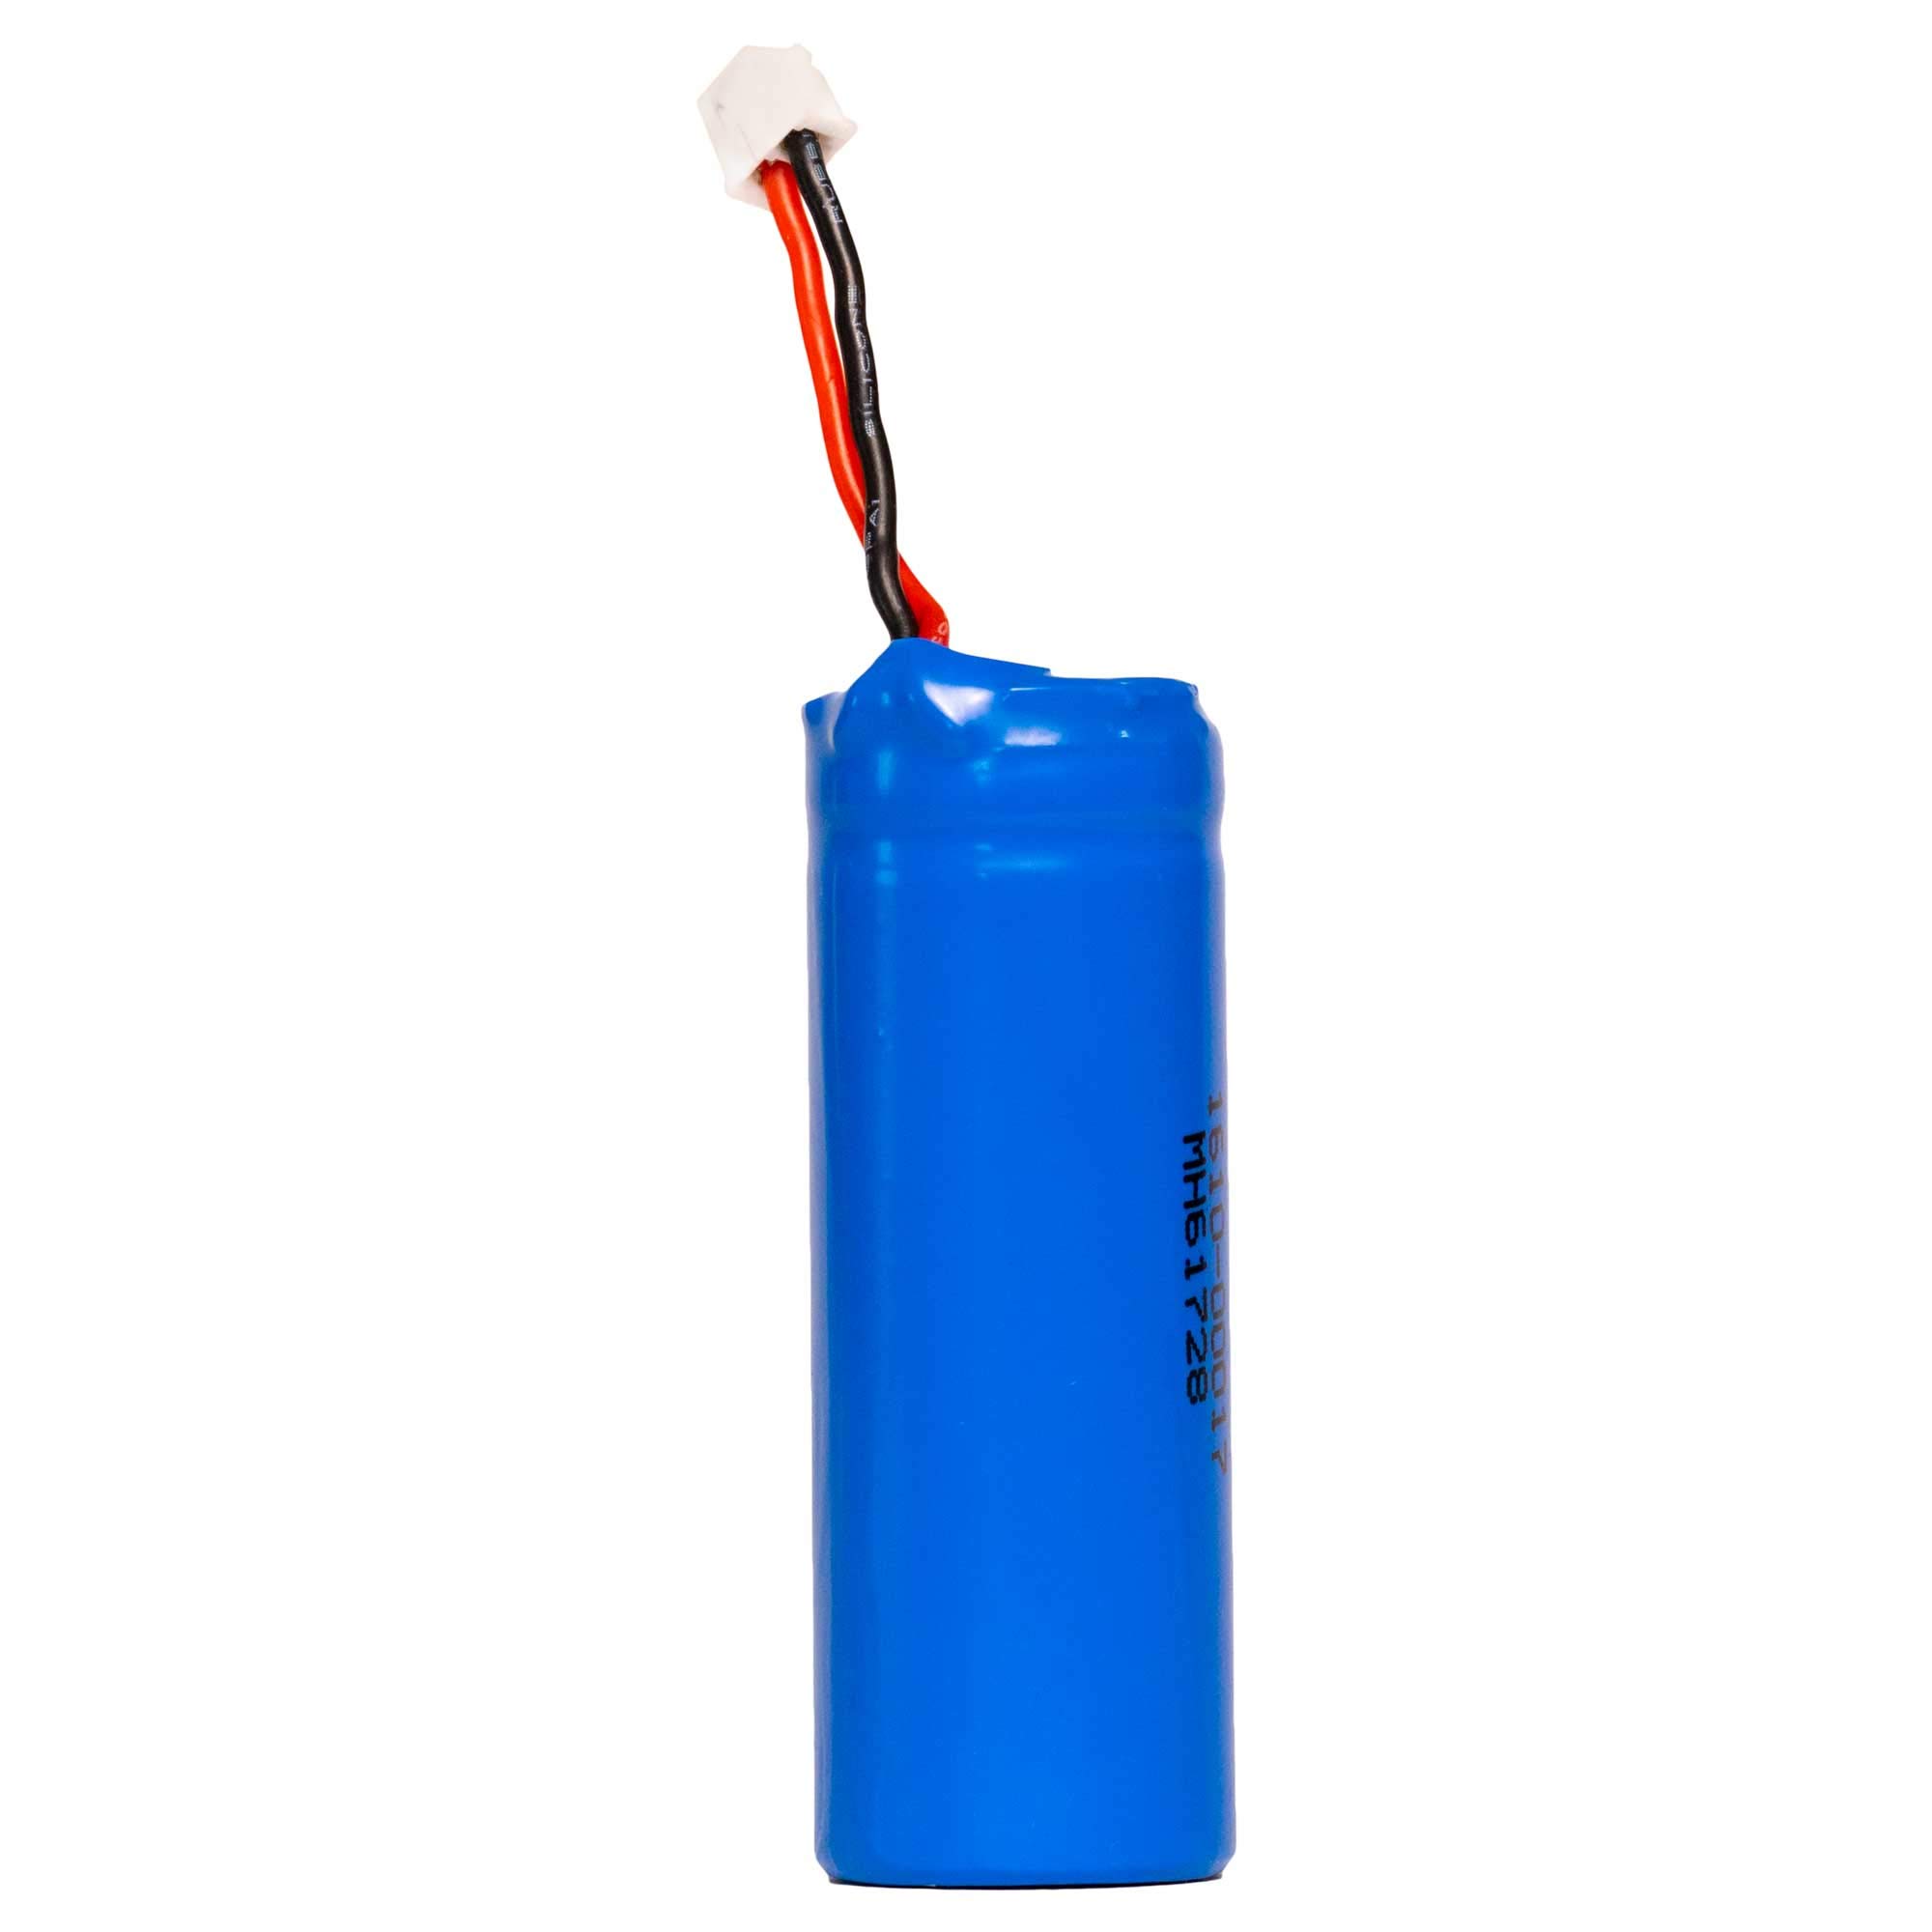 LITHIUM ION BATTERY FOR D700